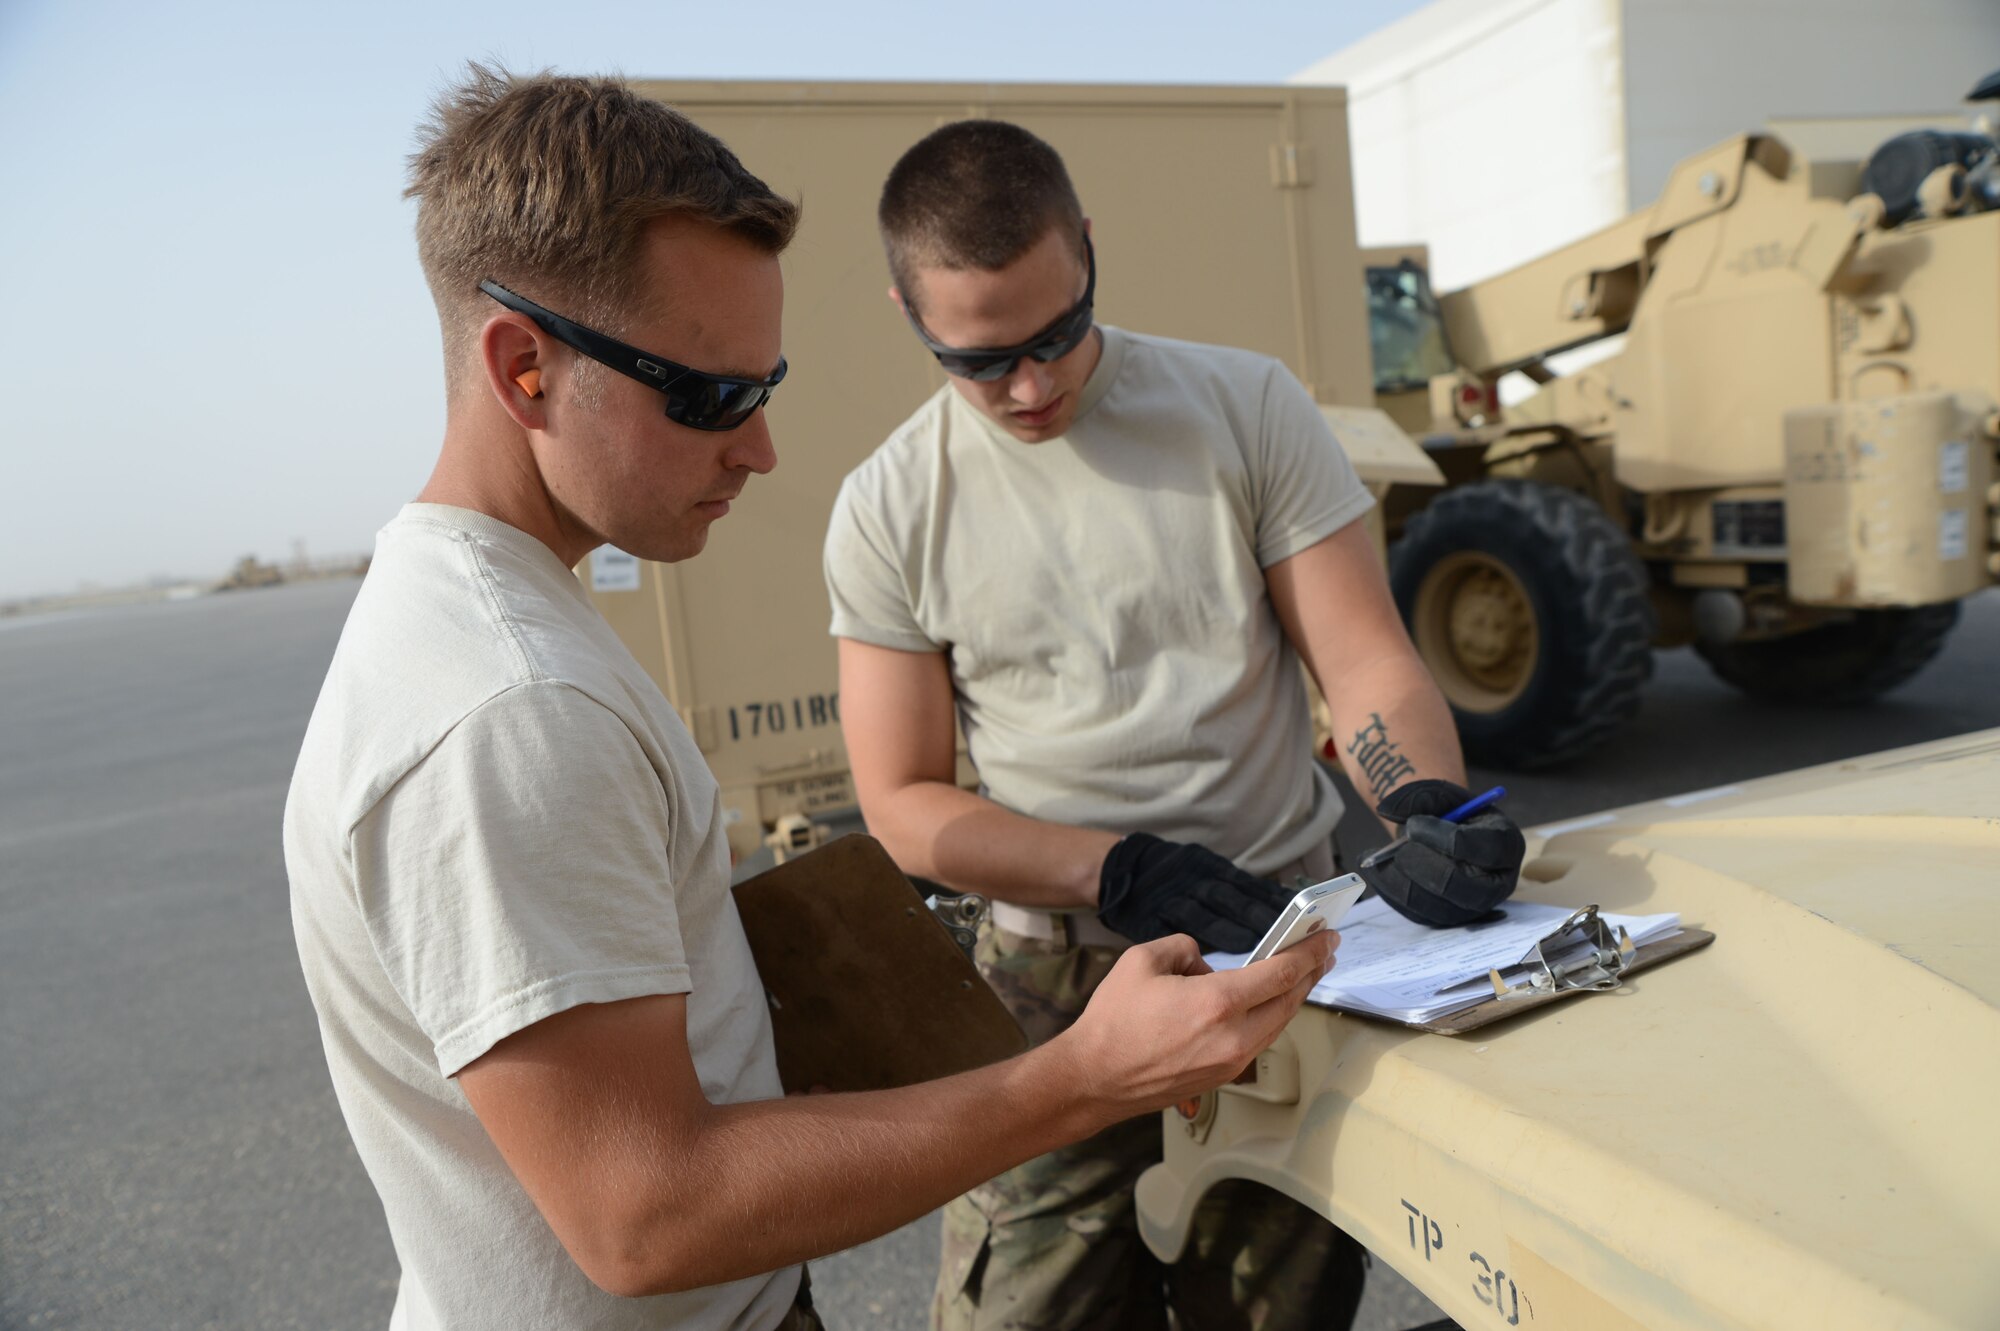 U.S. Air Force Staff Sgt. Michael Middleton and Tech. Sgt. Chaz Jensby verify weights and measurements of a Mine Resistant Ambush Protected All-Terrain Vehicle as part of inspection procedures at Mazar-e Sharif, Afghanistan June 24, 2014. Jensby, a native of Lincoln, Neb., is a reservist deployed from the 155th Air Refueling Wing, Lincoln, Neb., while Middleton is a native of Bonney Lake, Wash., and deployed from the 732nd Air Mobility Squadron at Joint Base Elmendorf-Richardson, Alaska. (U.S. Air Force photo by Master Sgt. Cohen A. Young/Released)  